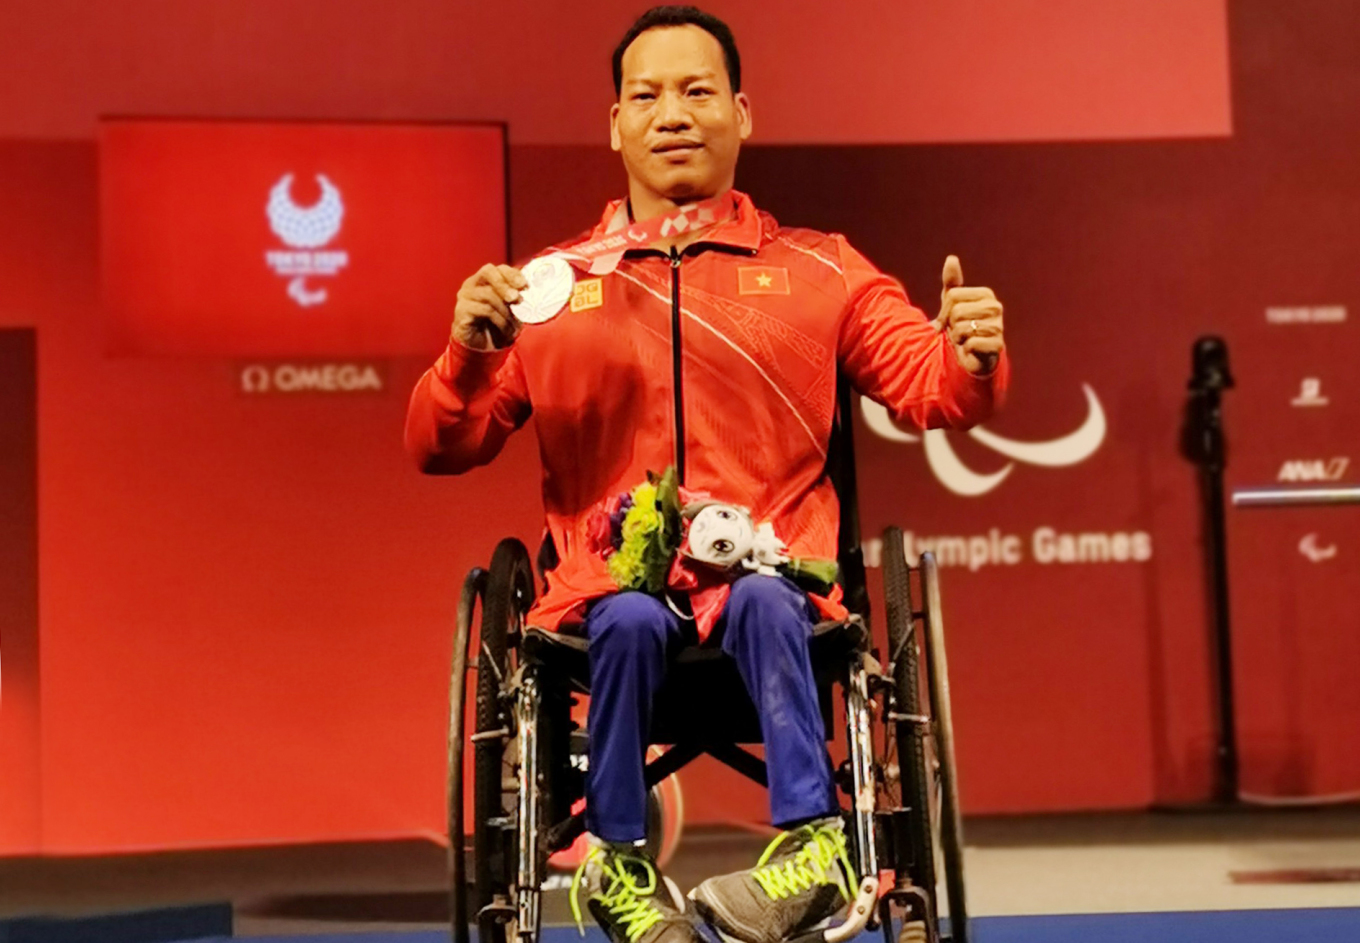 Le Van Cong with his silver medal at Tokyo Paralympics on August 26, 2021. Photo courtesy of Vietnam Sports Delegation